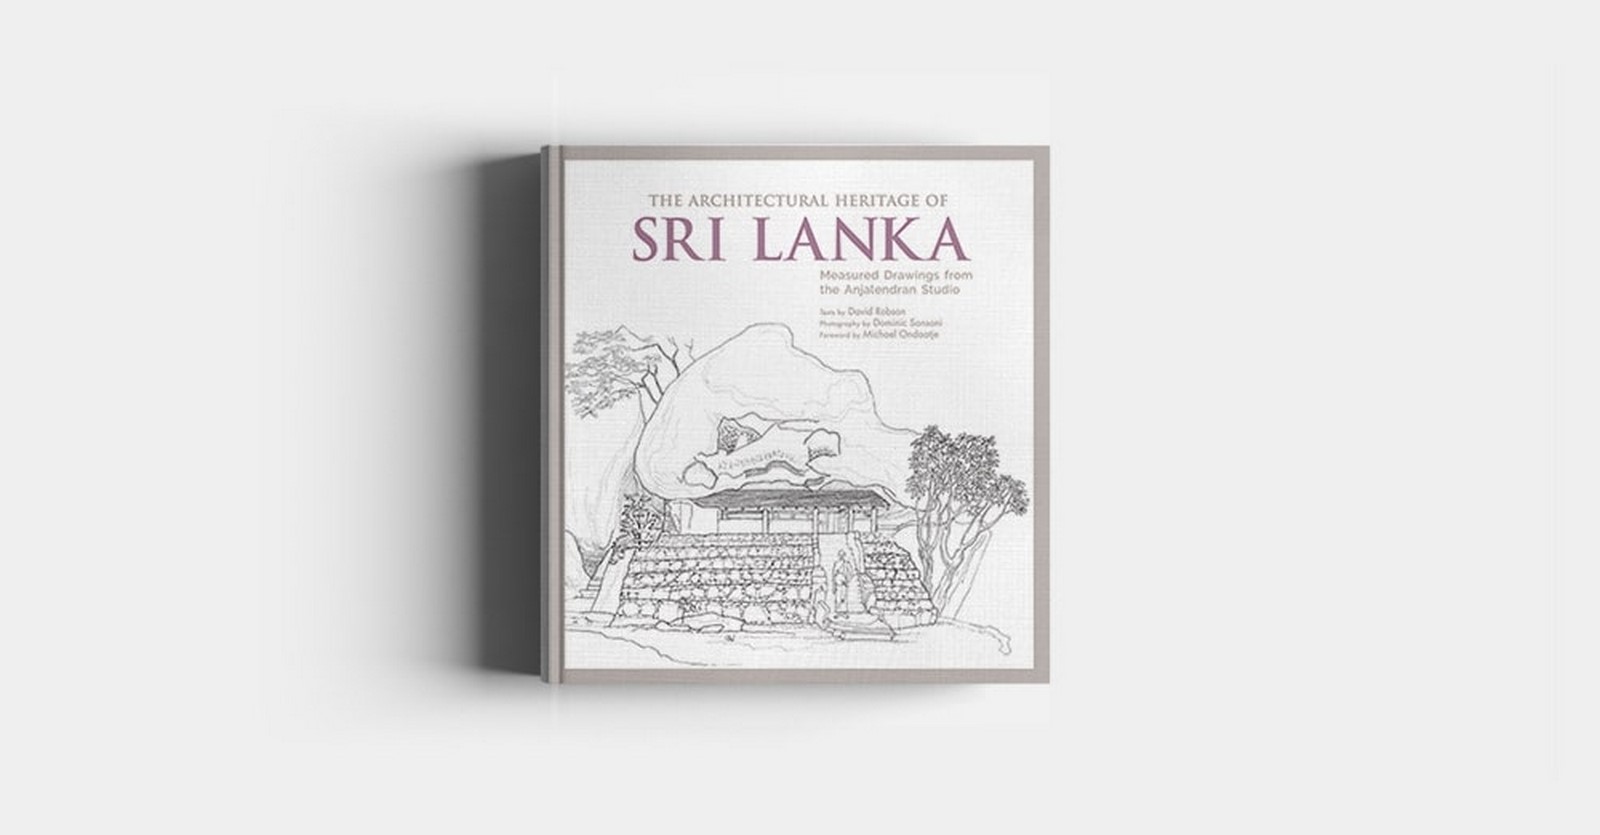 Book in Focus: The Architectural Heritage of Sri Lanka : Measured Drawings by Anjalendran Studio - Sheet1